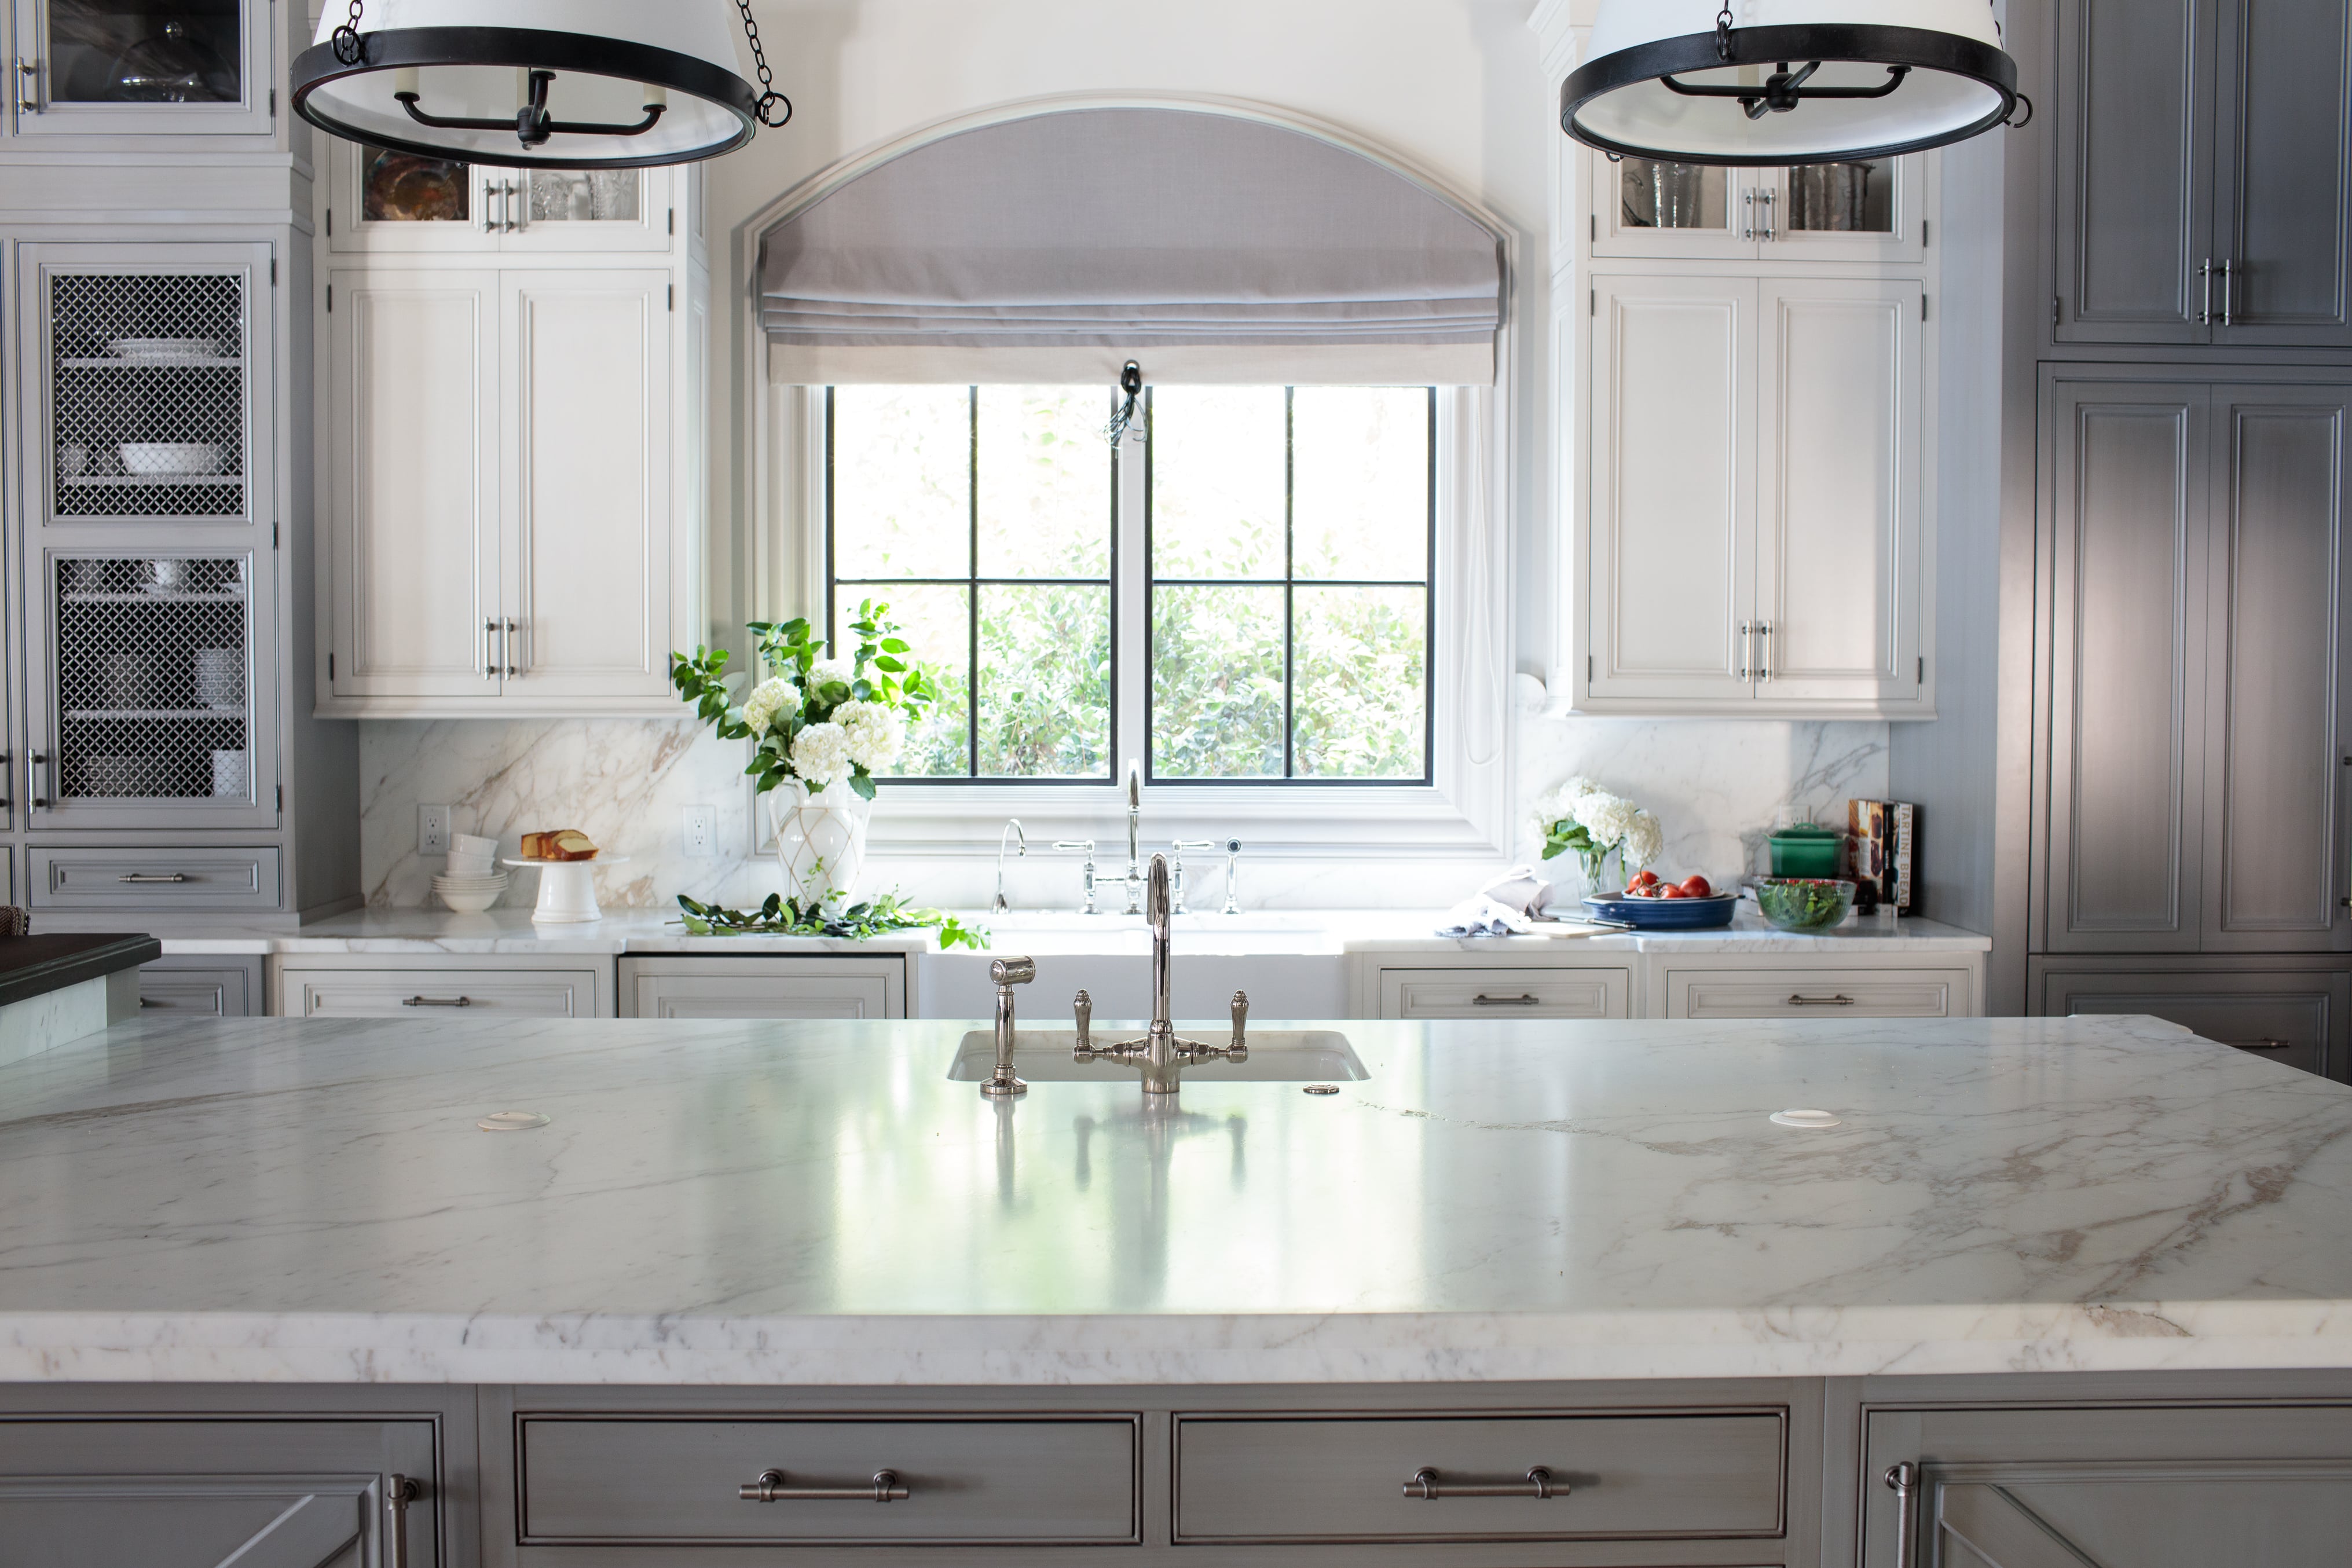 hilton head kitchen by j banks design group with surfaces clad in luxury materials and classic cabinetry